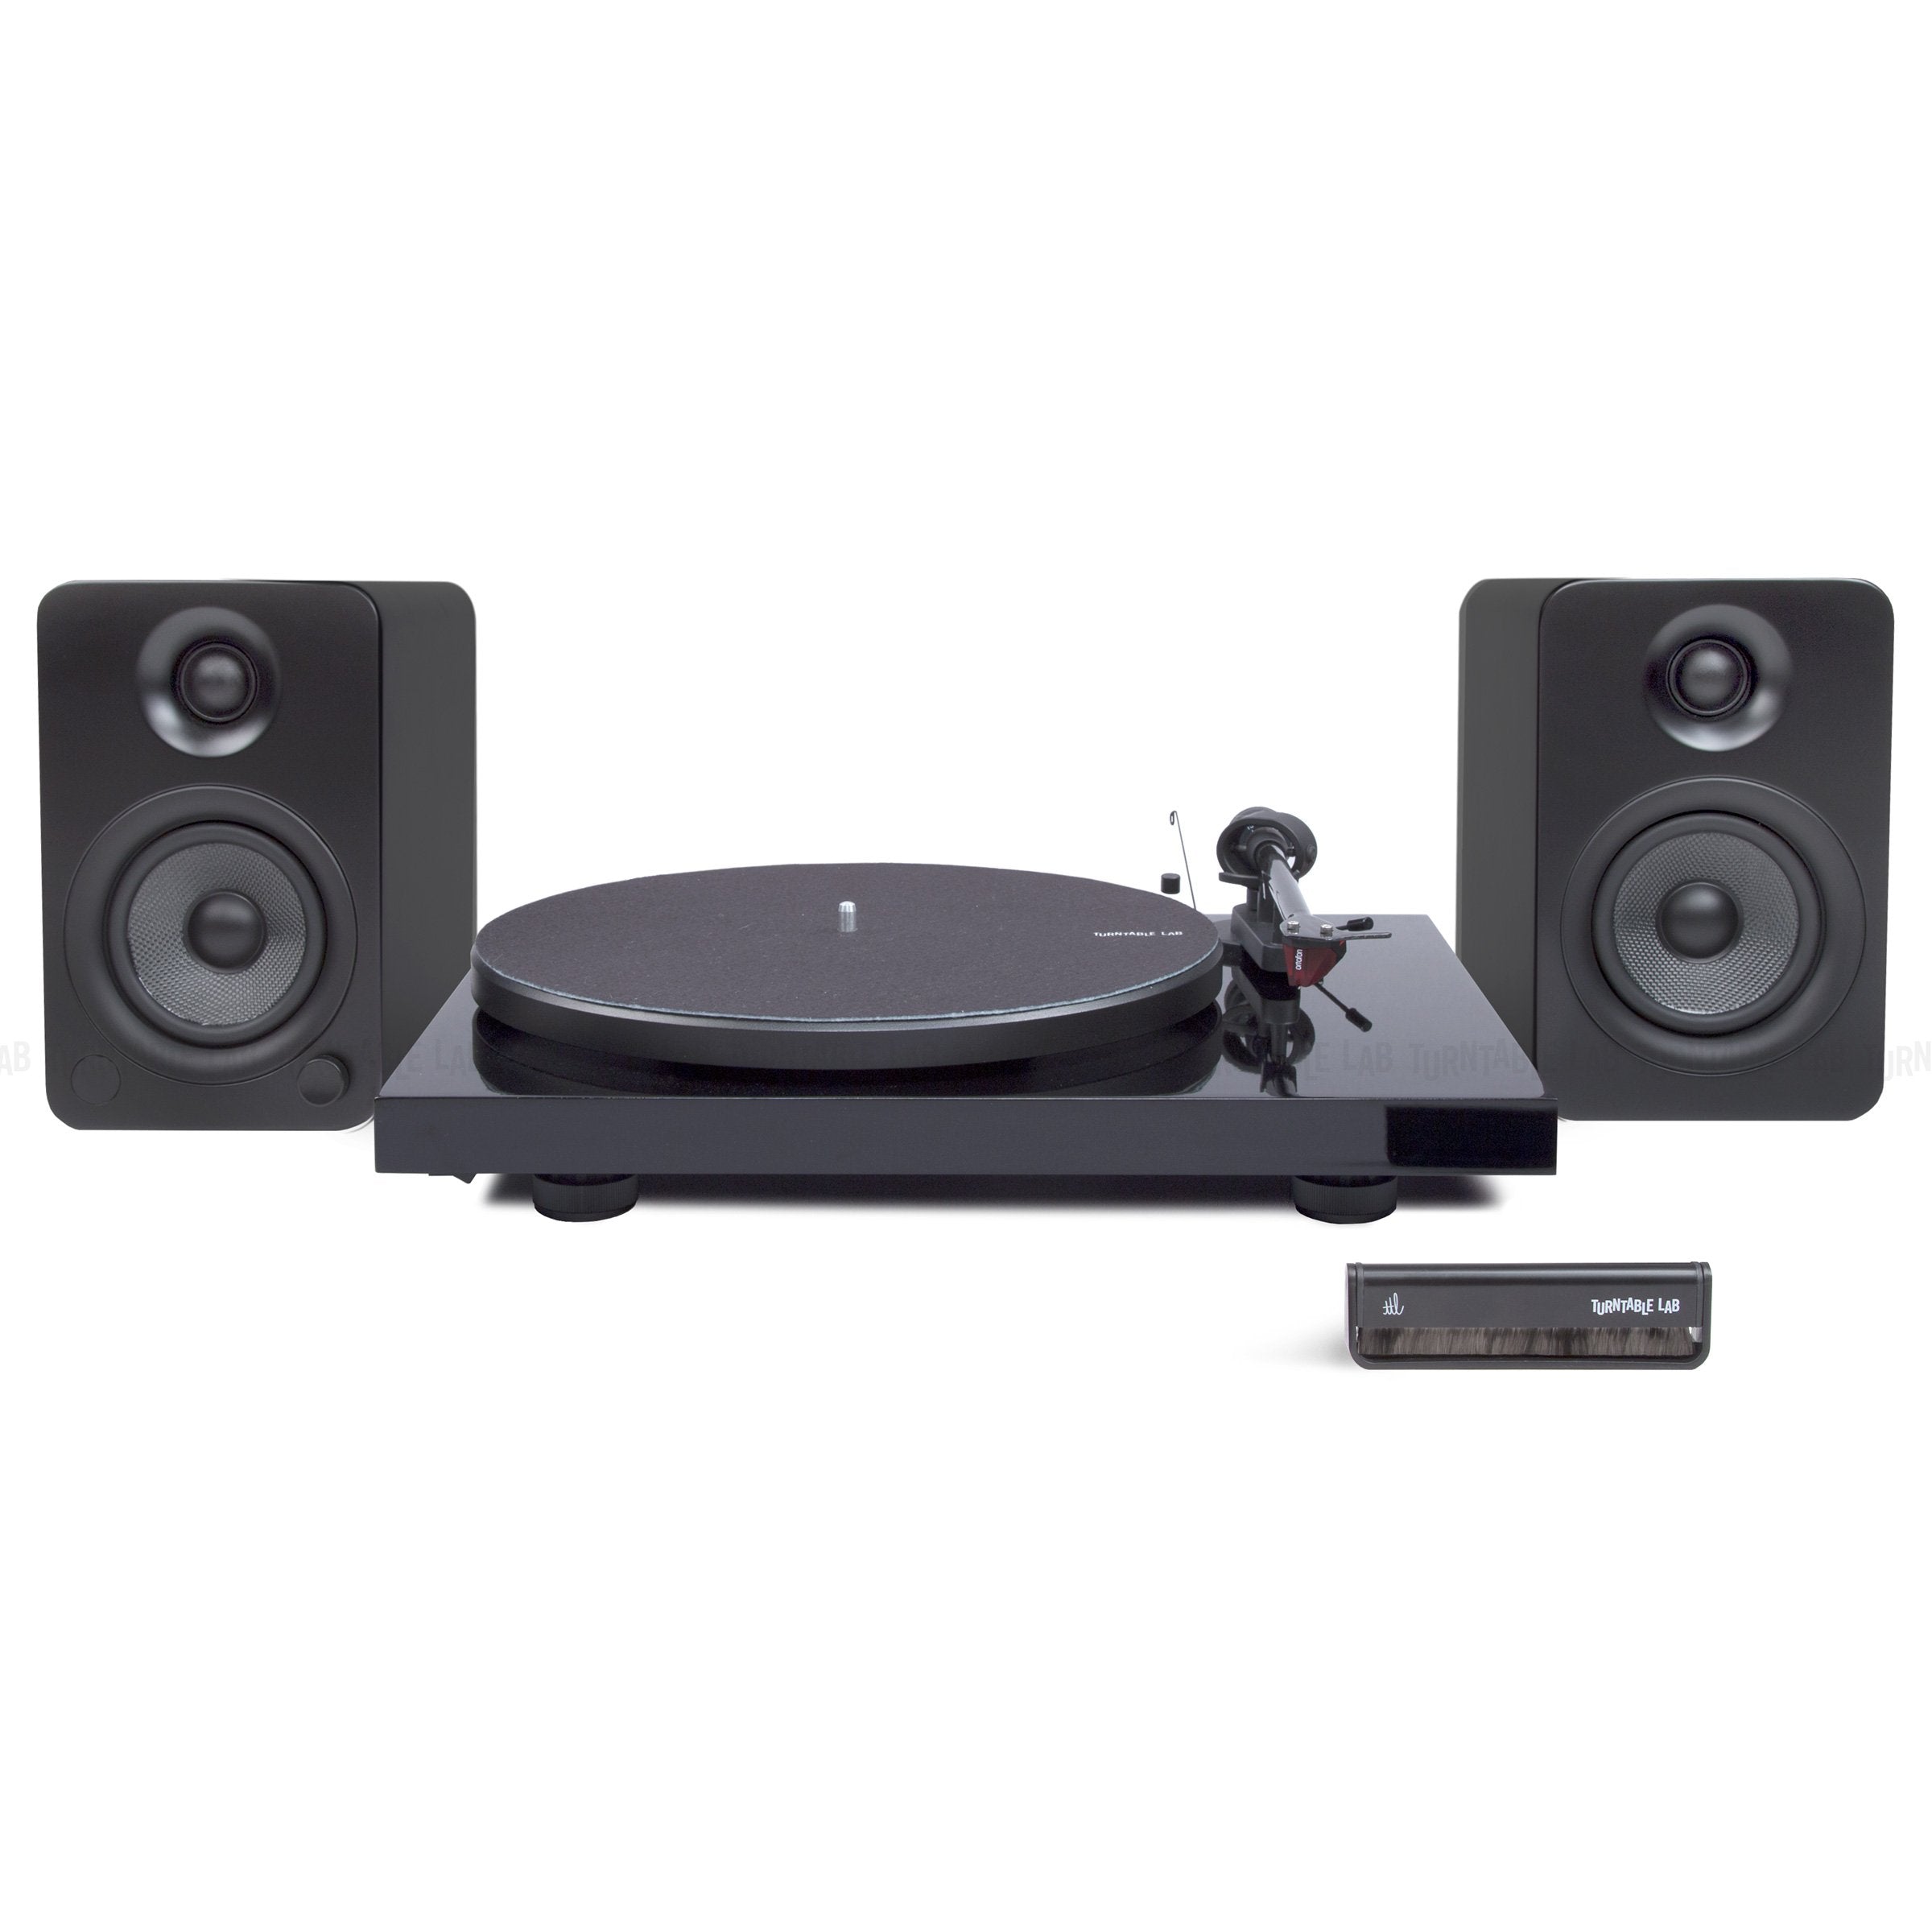 Pro-Ject: Debut Carbon DC / Kanto YU4 / Turntable Package